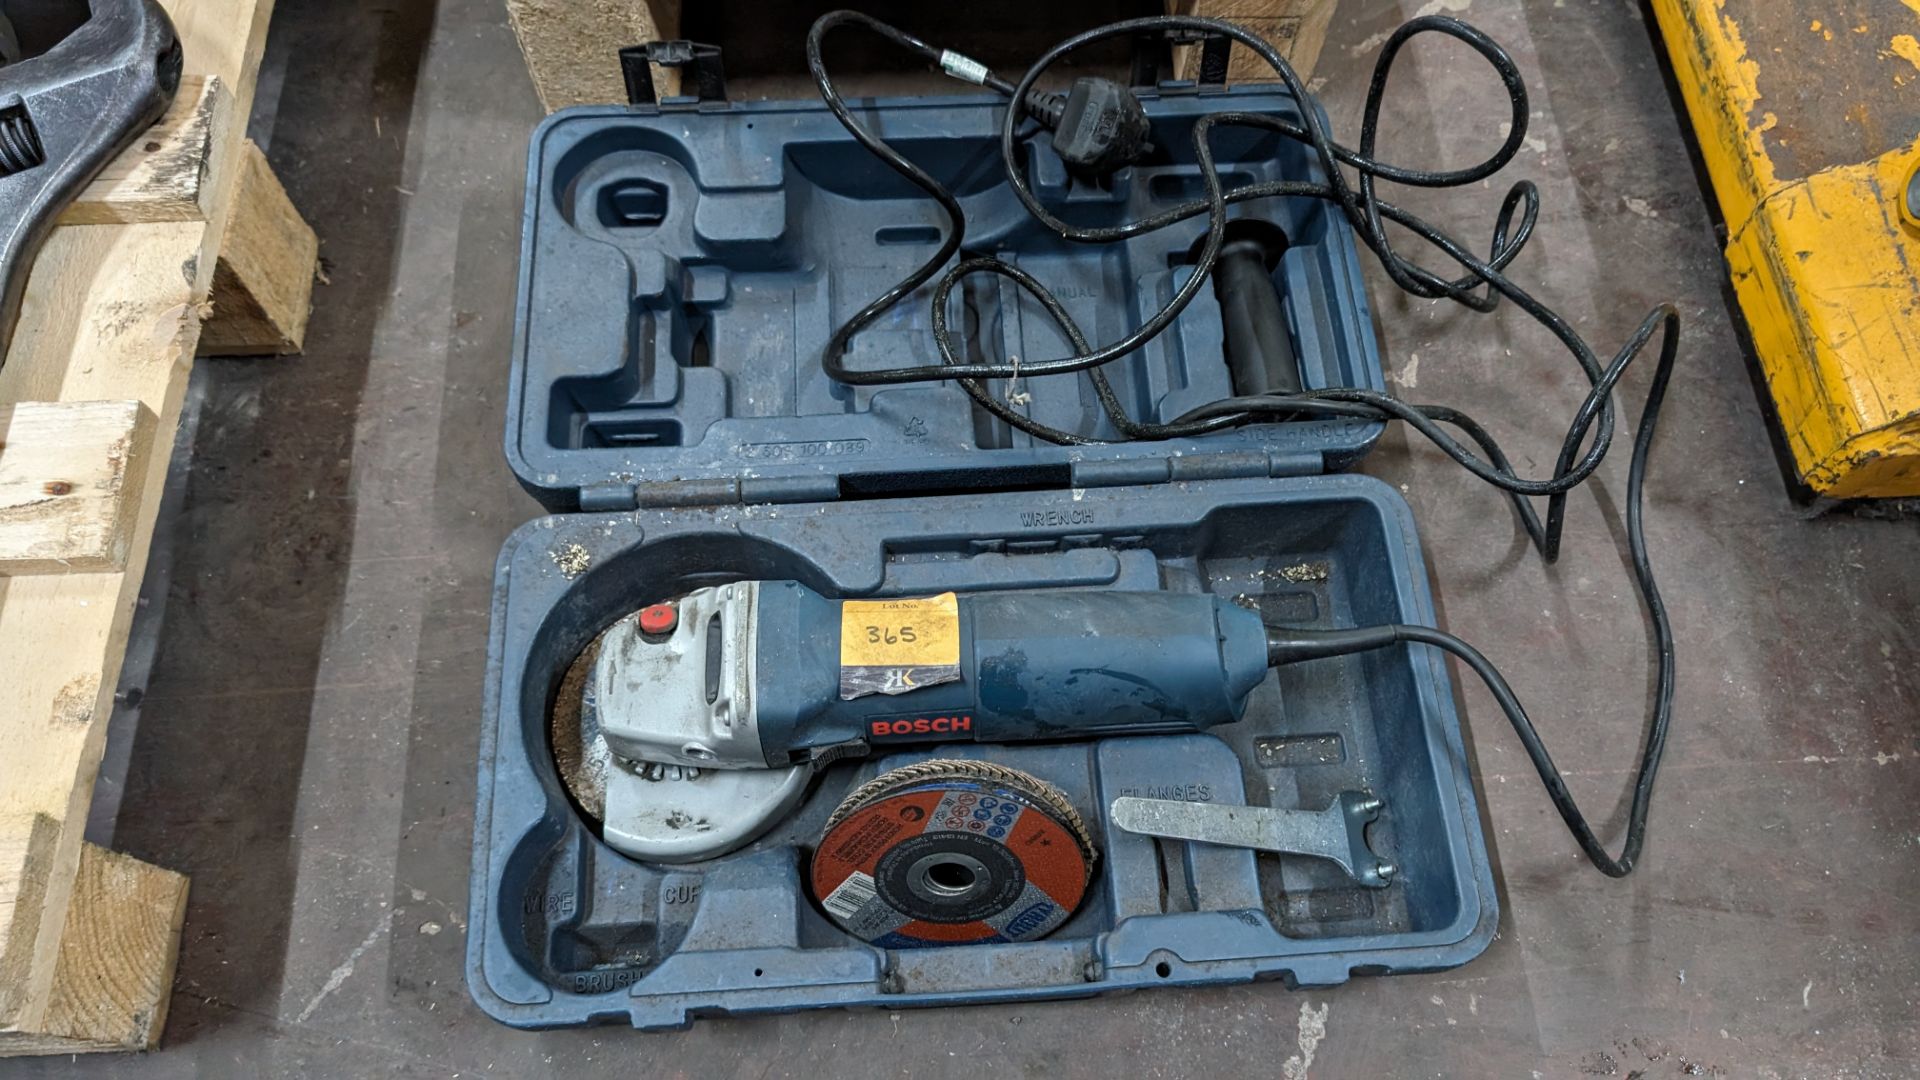 Bosch angle grinder with discs & case